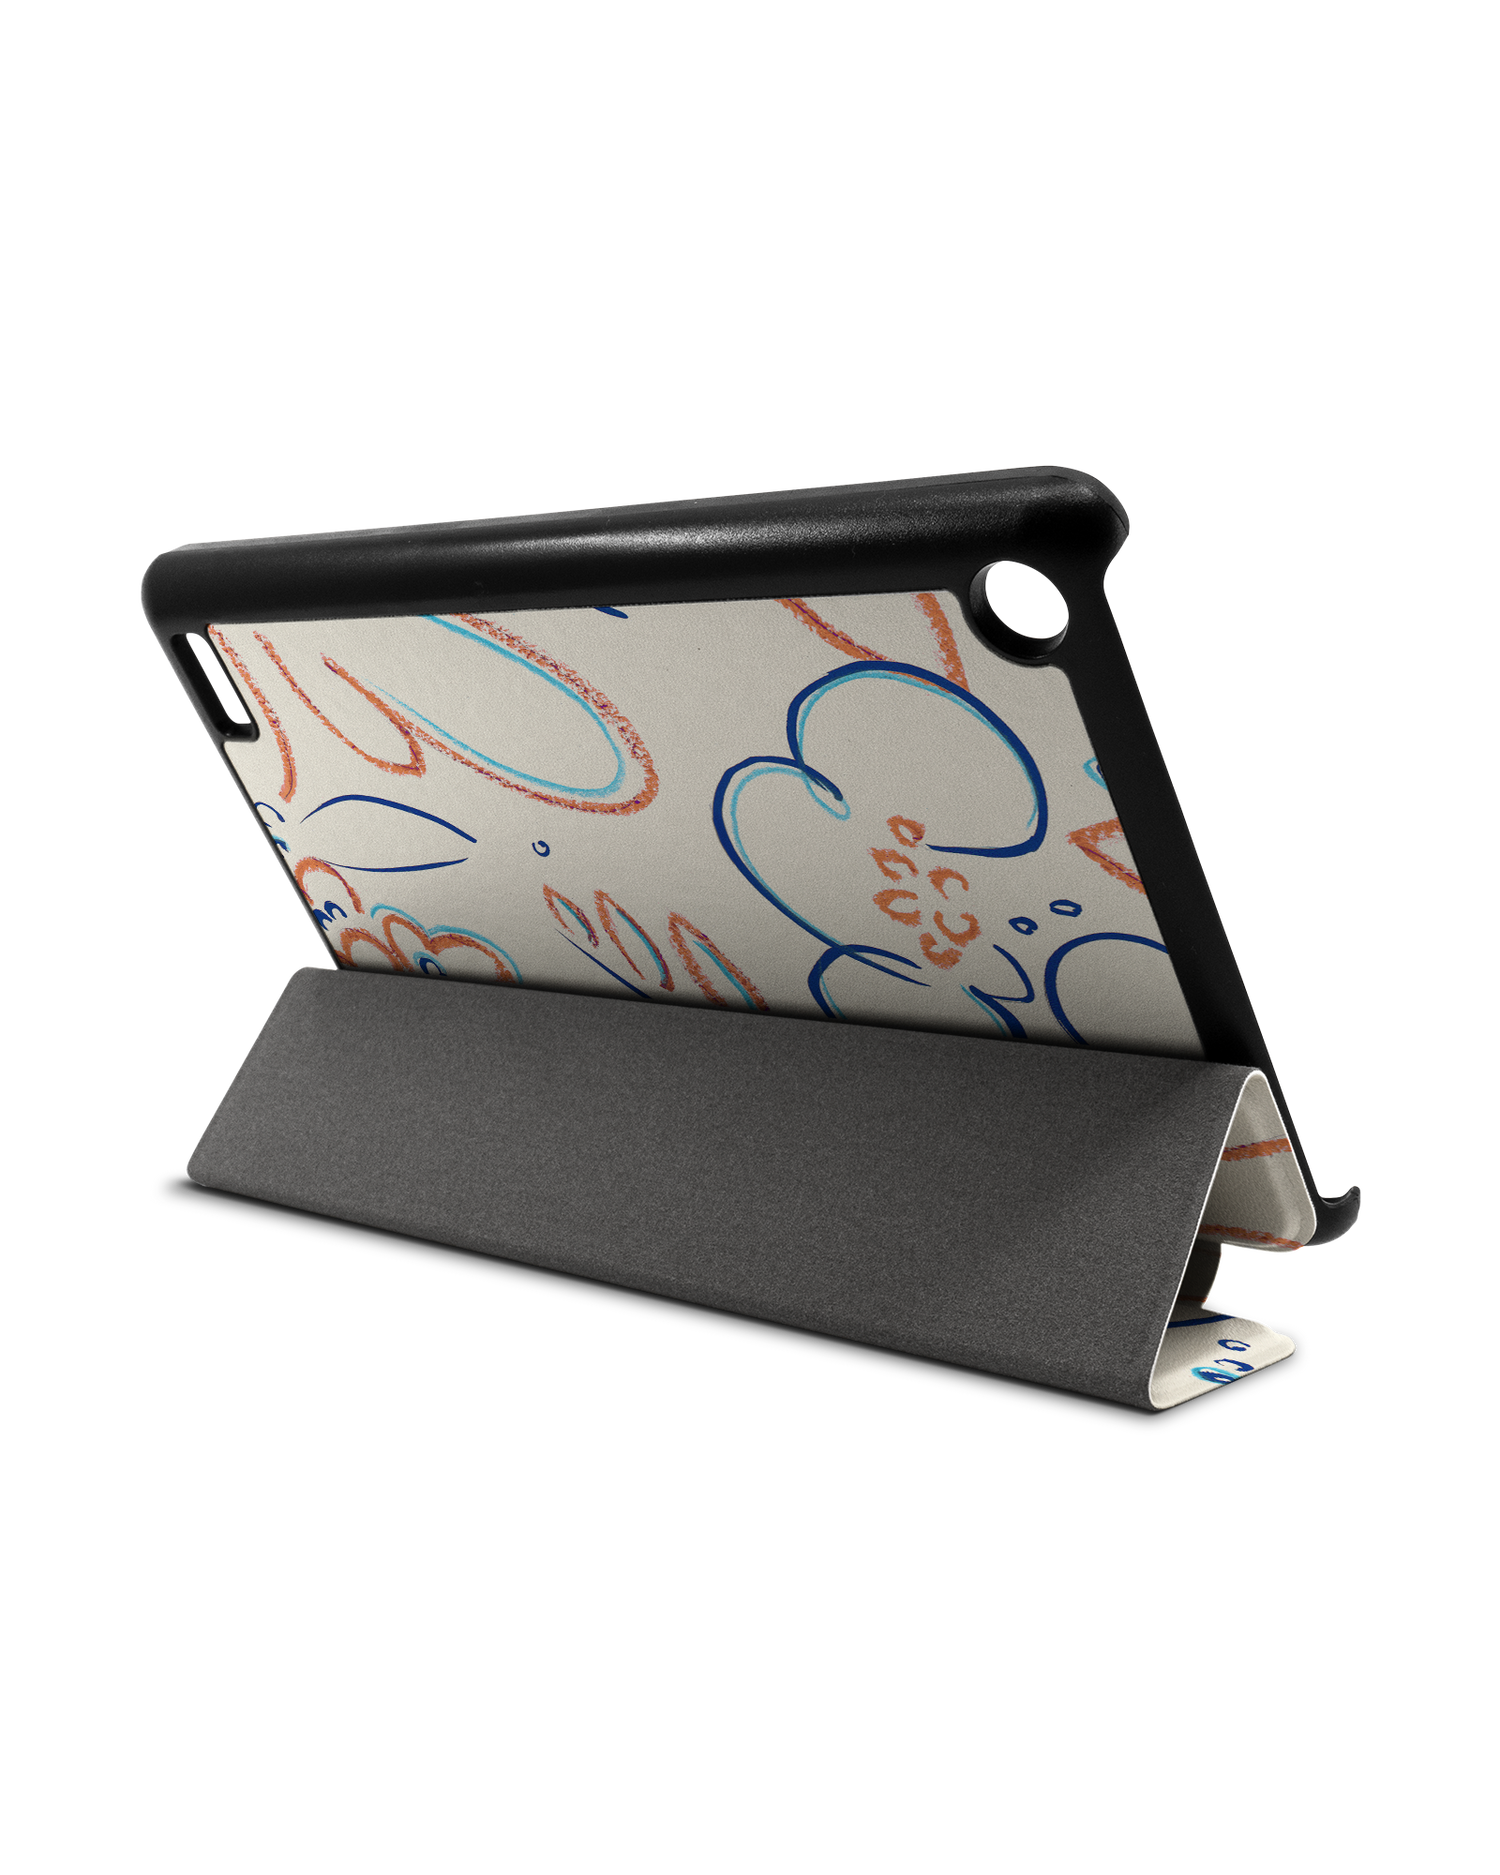 Bloom Doodles Tablet Smart Case for Amazon Fire 7: Used as Stand